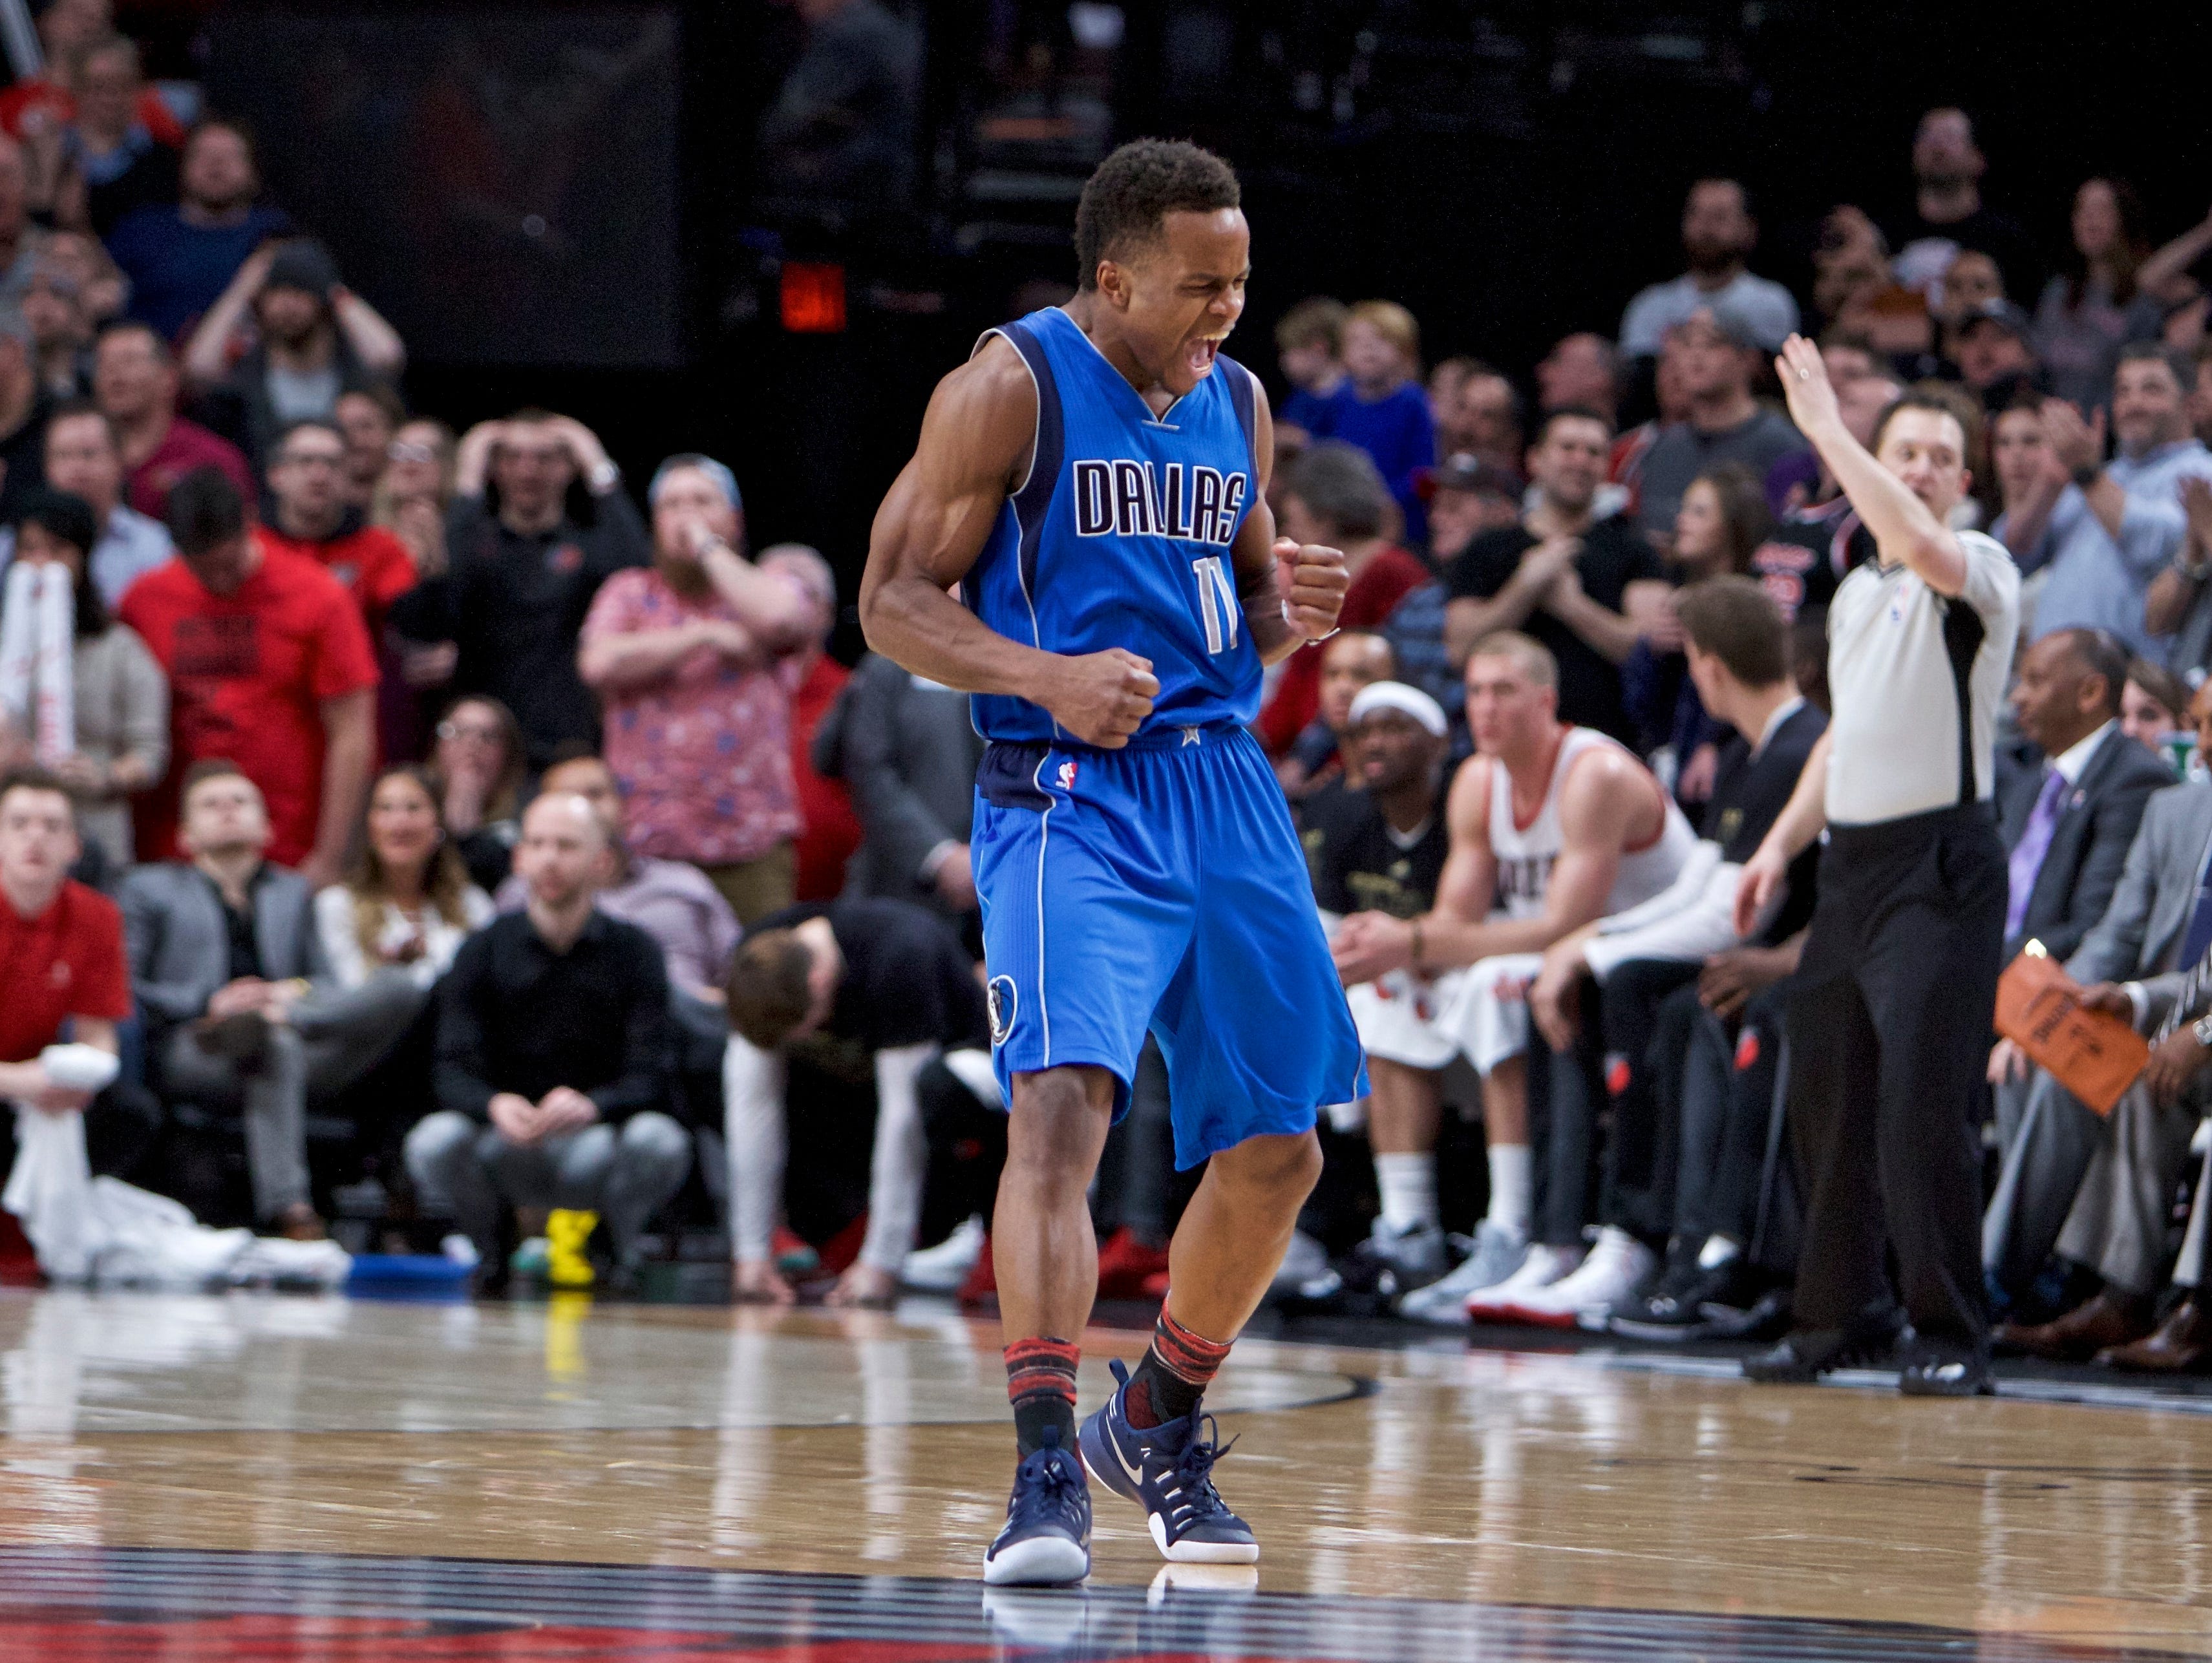 Dallas Mavericks guard Yogi Ferrell reacts after making a 3-point basket against the Portland Trail Blazers during the second half of an NBA basketball game in Portland, Ore., Friday, Feb. 3, 2017.